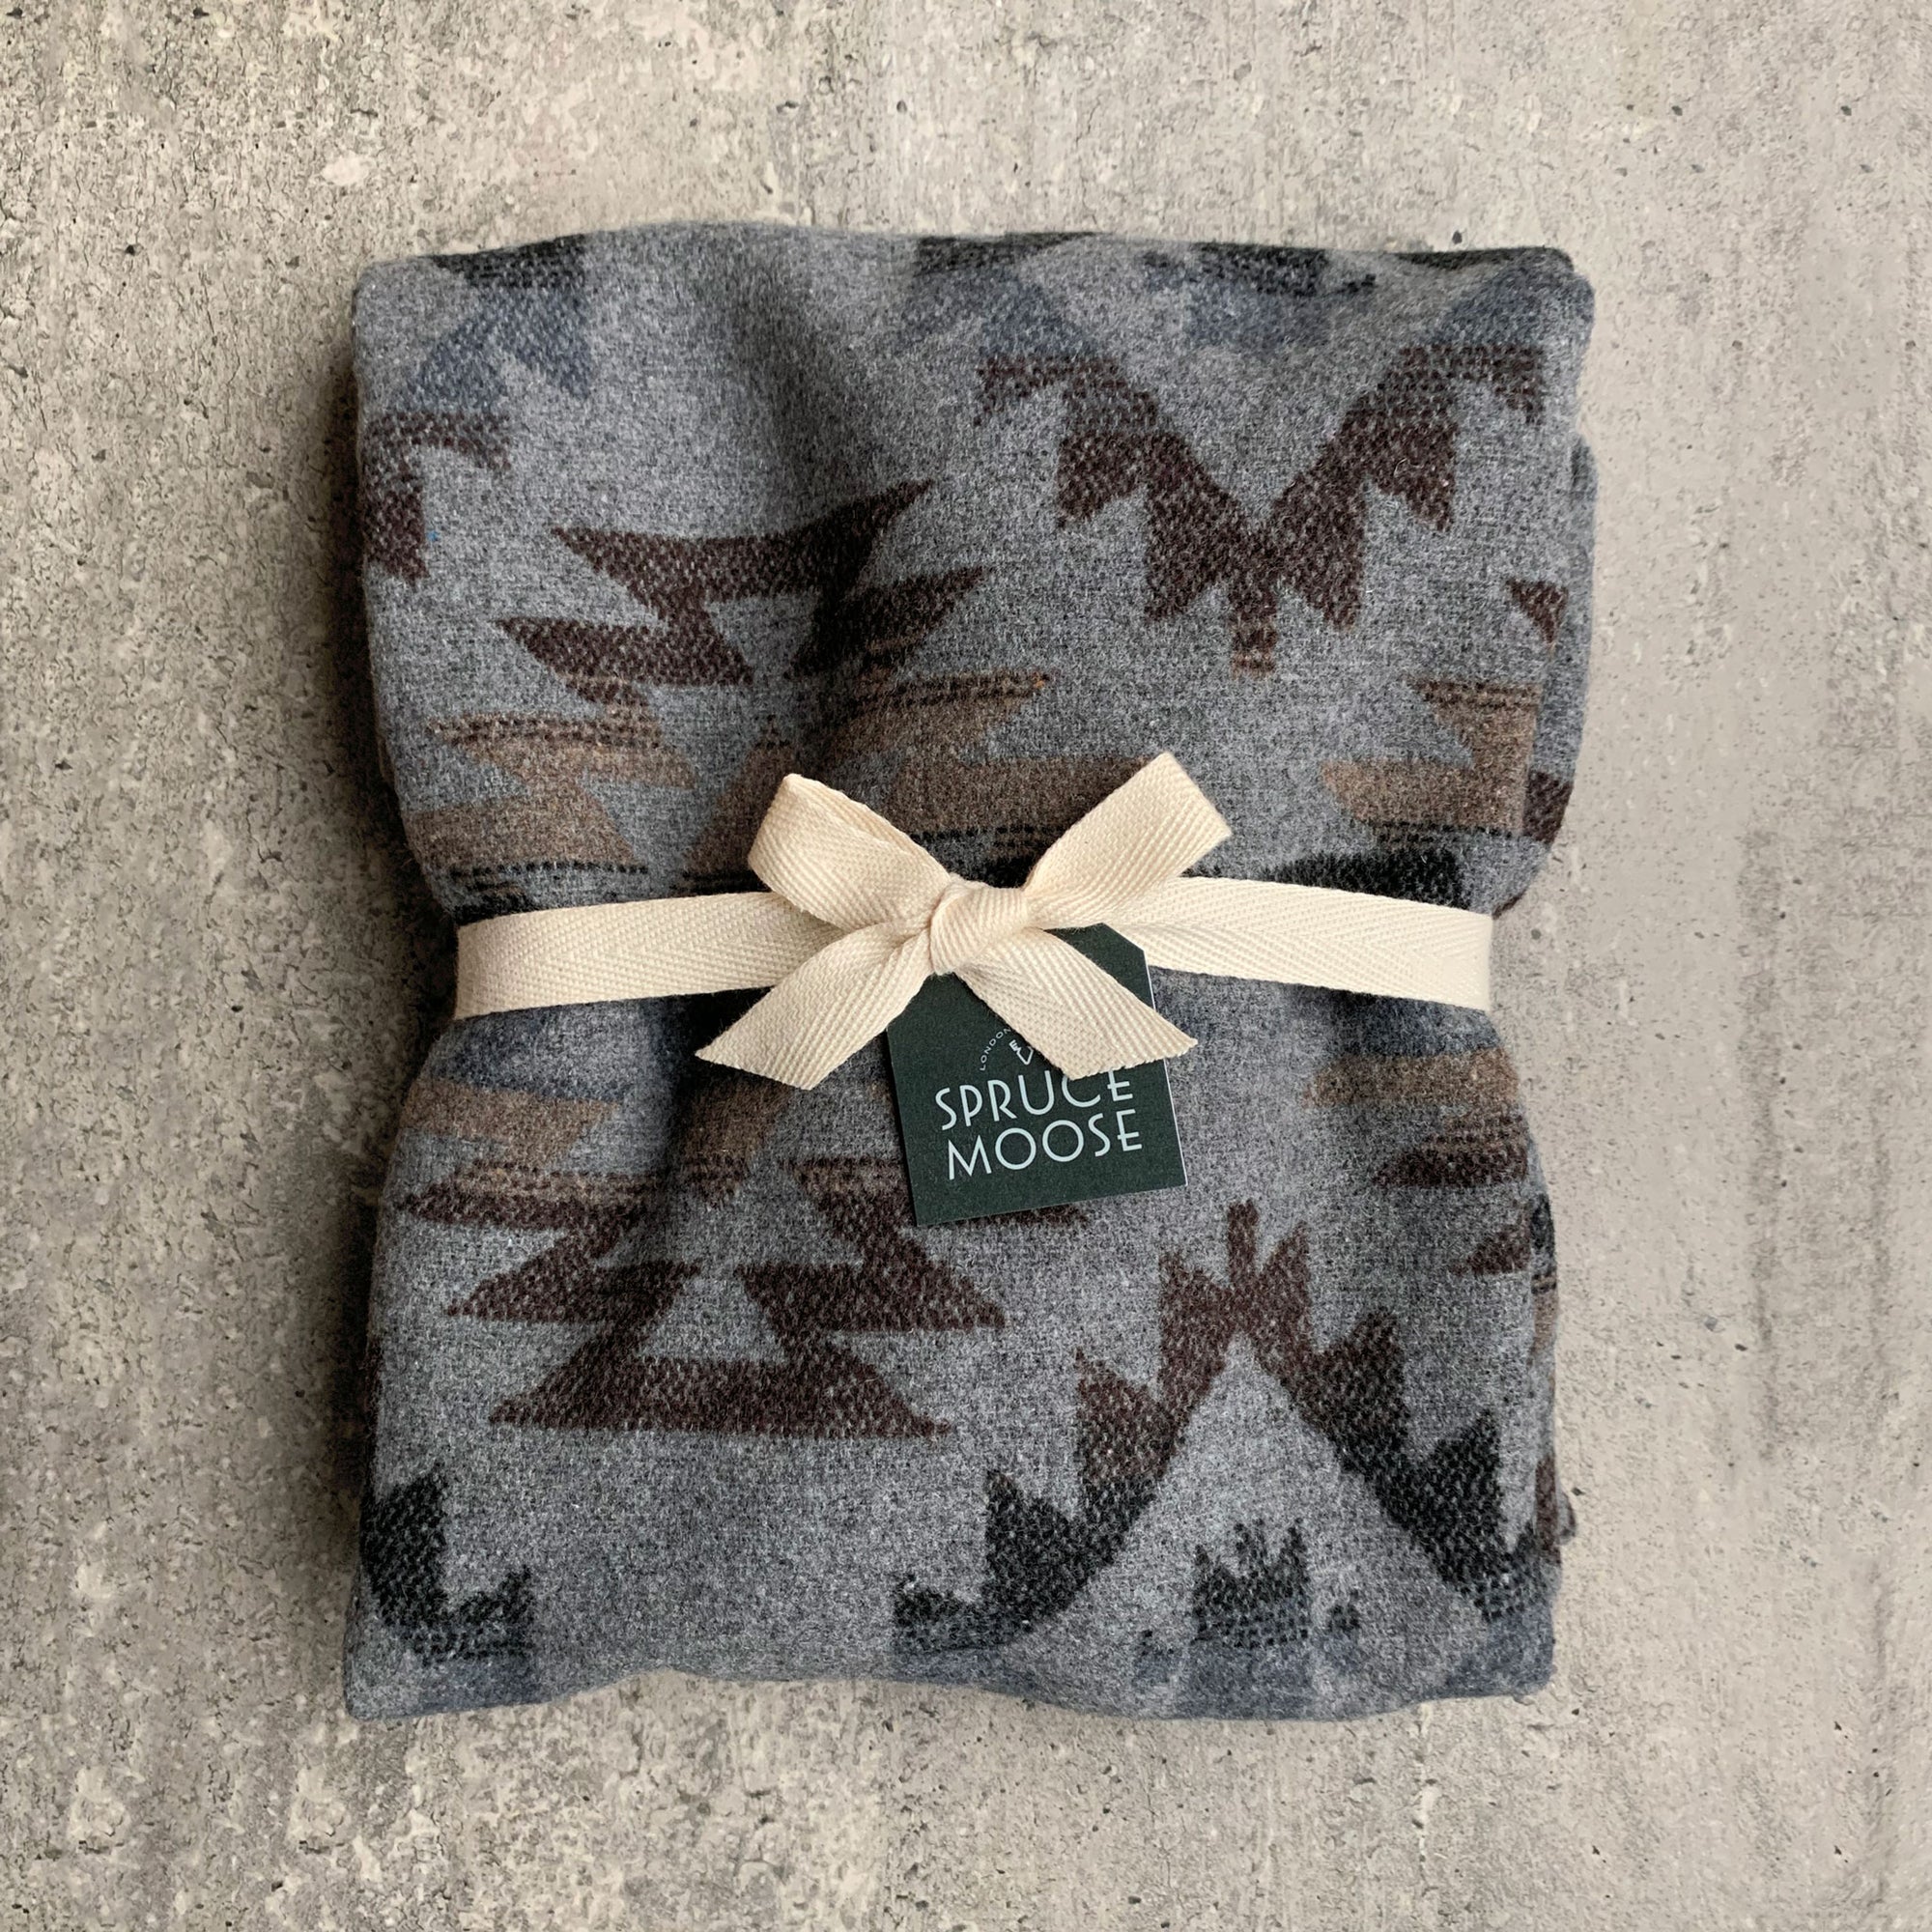 Spruce Moose Signature Scarf - Greys & Browns